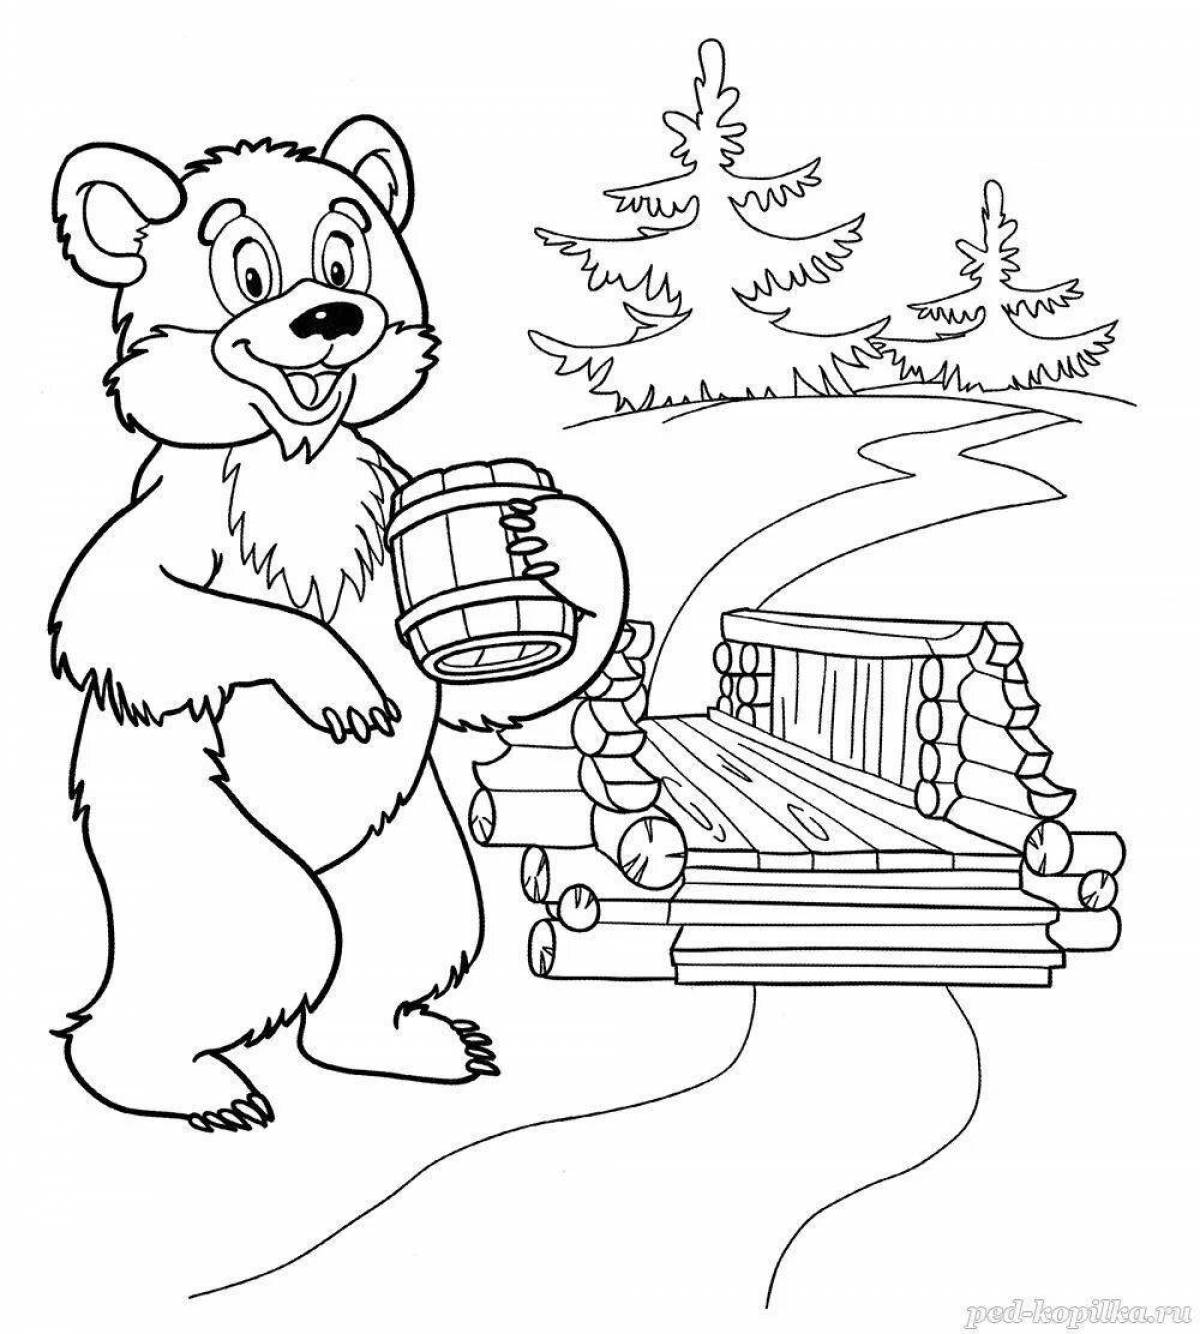 Colourful coloring bear in winter